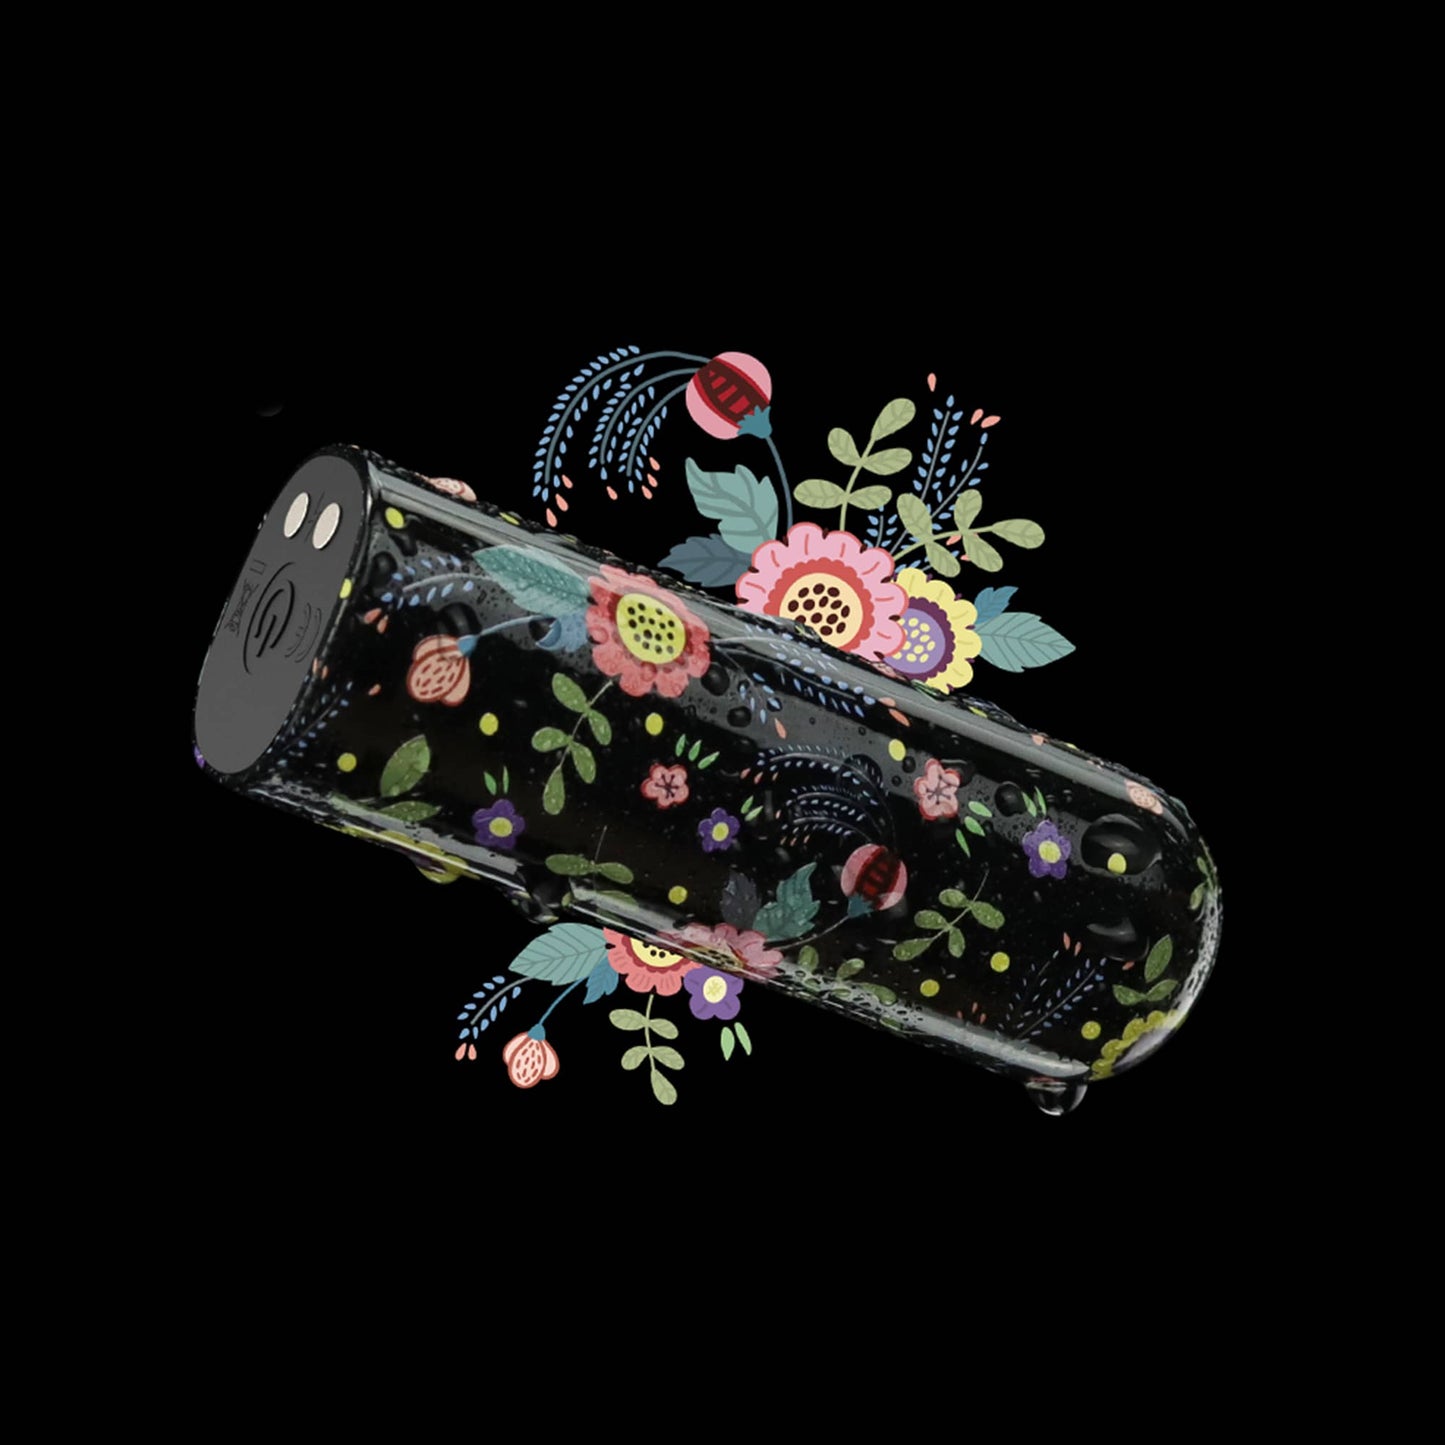 The balck floral pattern of the mini bullet vibrator rechargeable massager